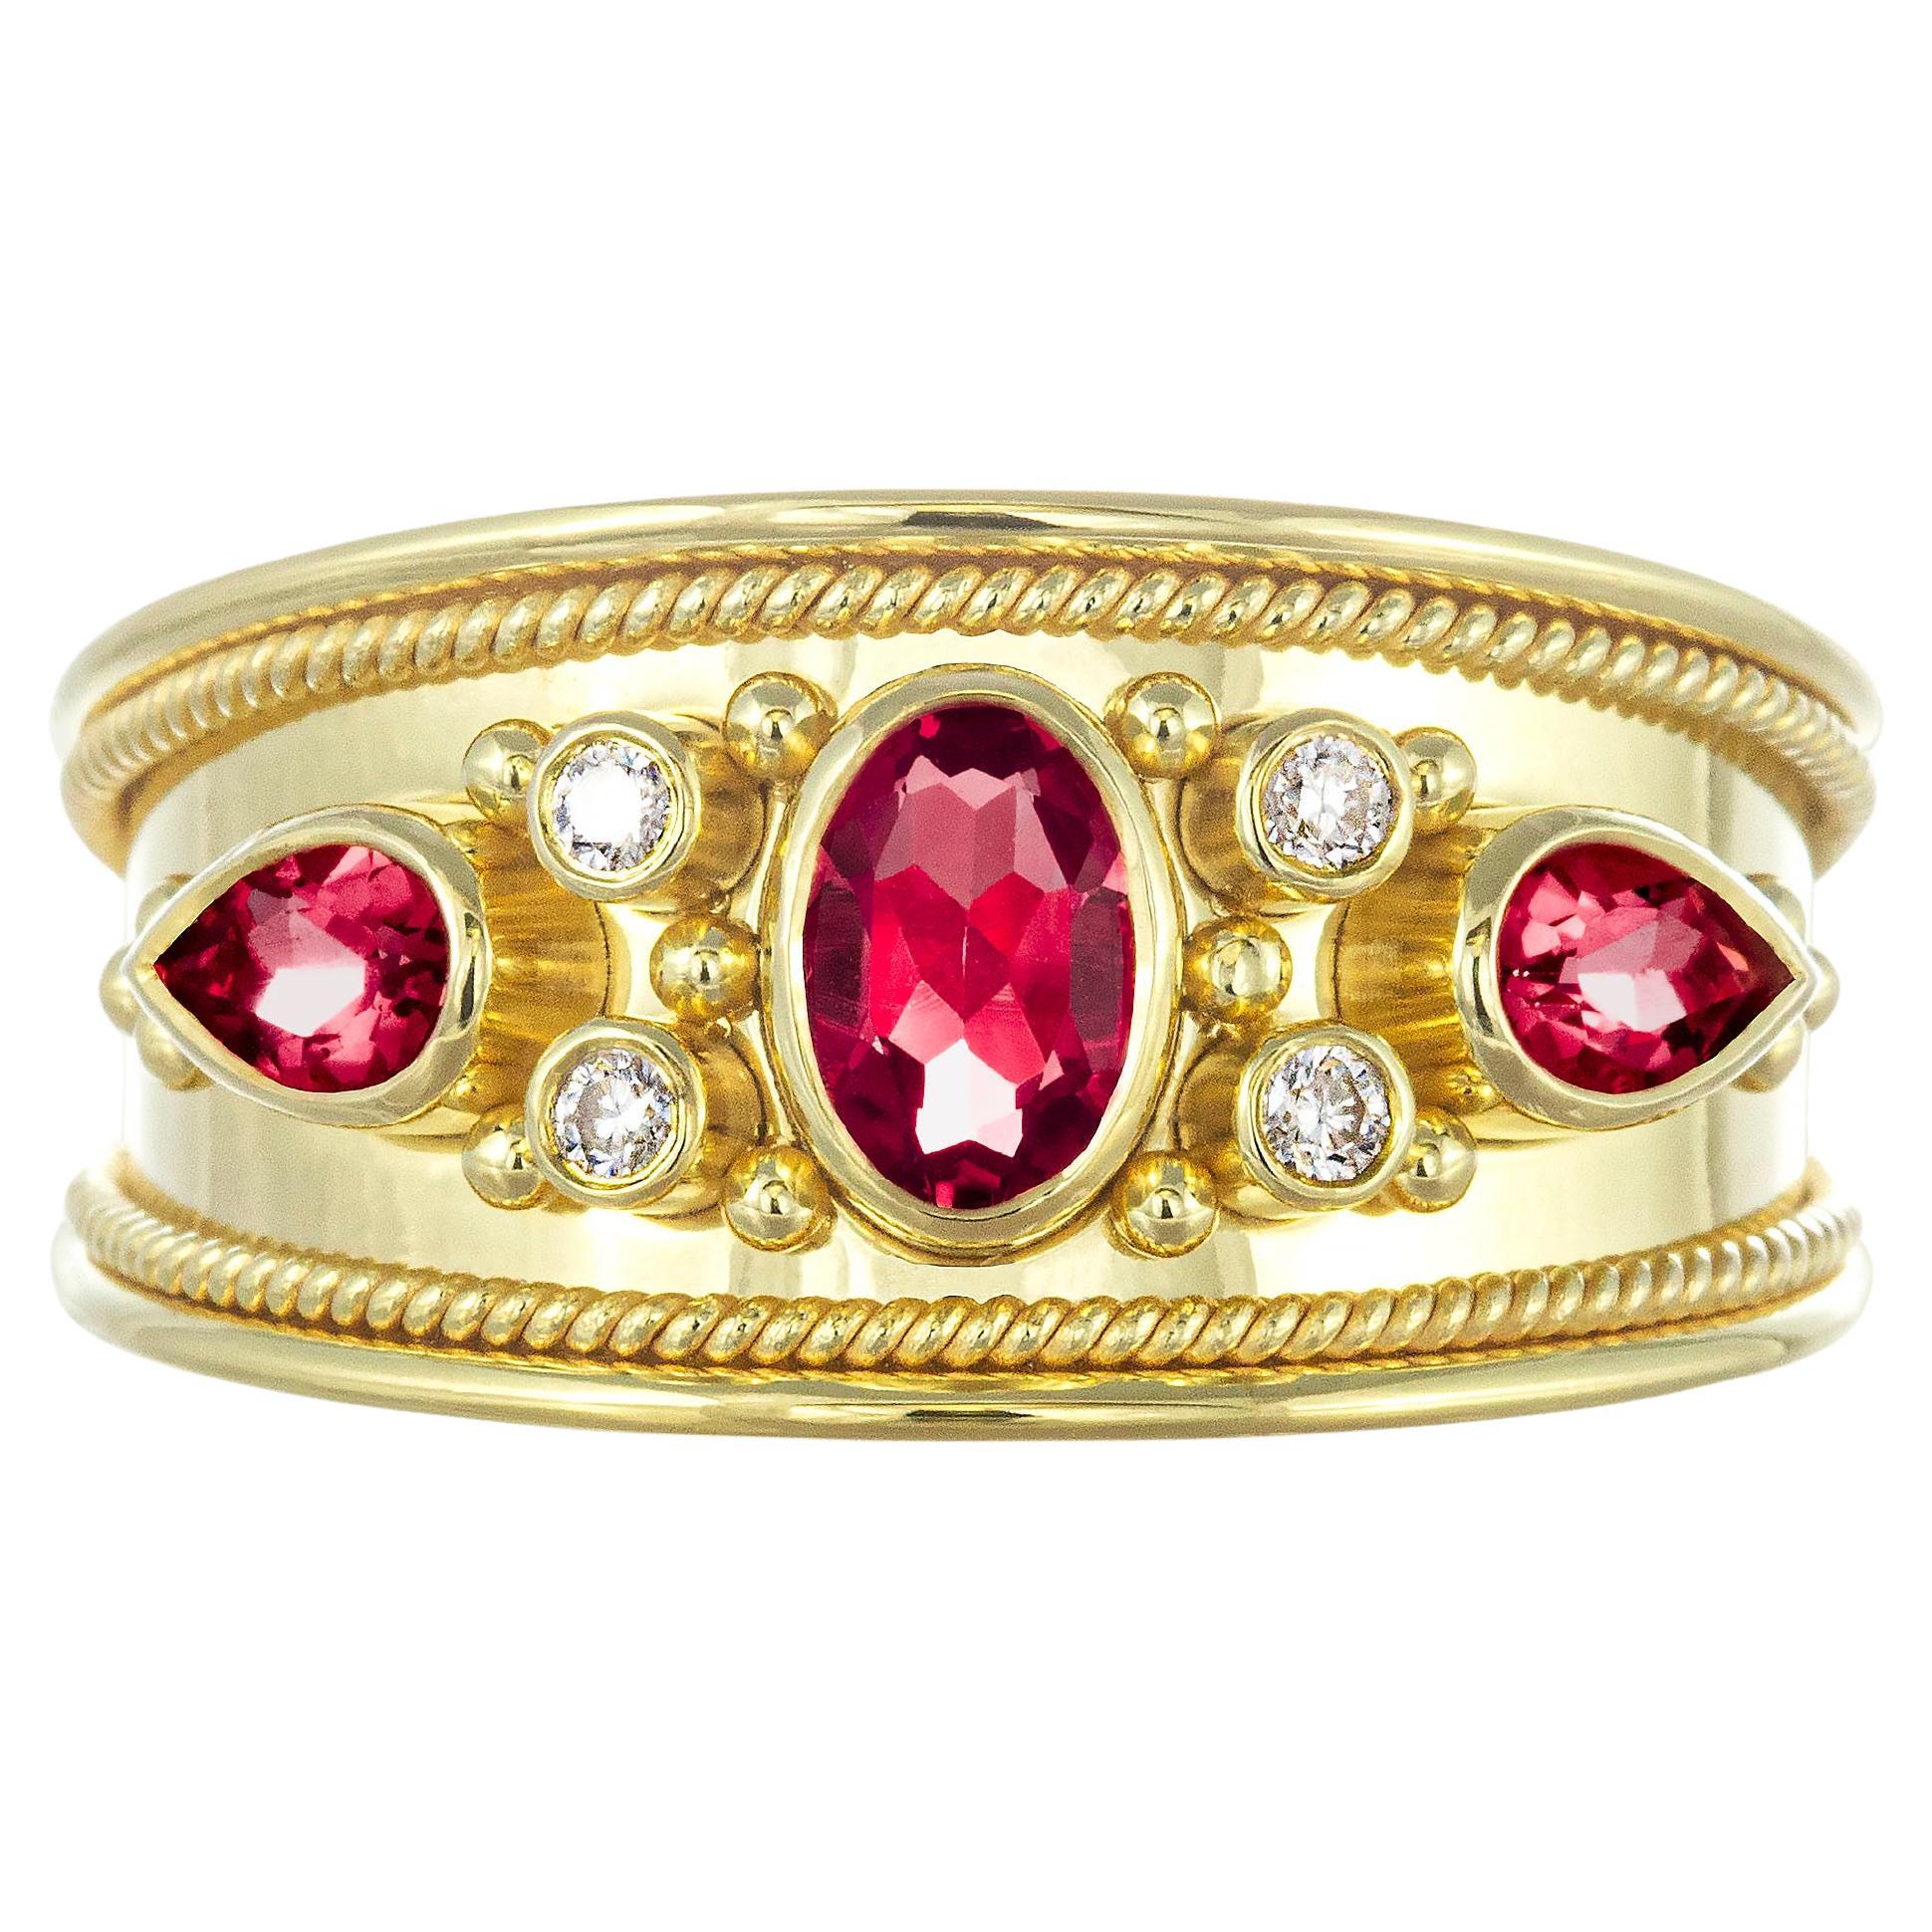 Byzantine Gold Ring with Rubies Diamonds and a Shiny Finish